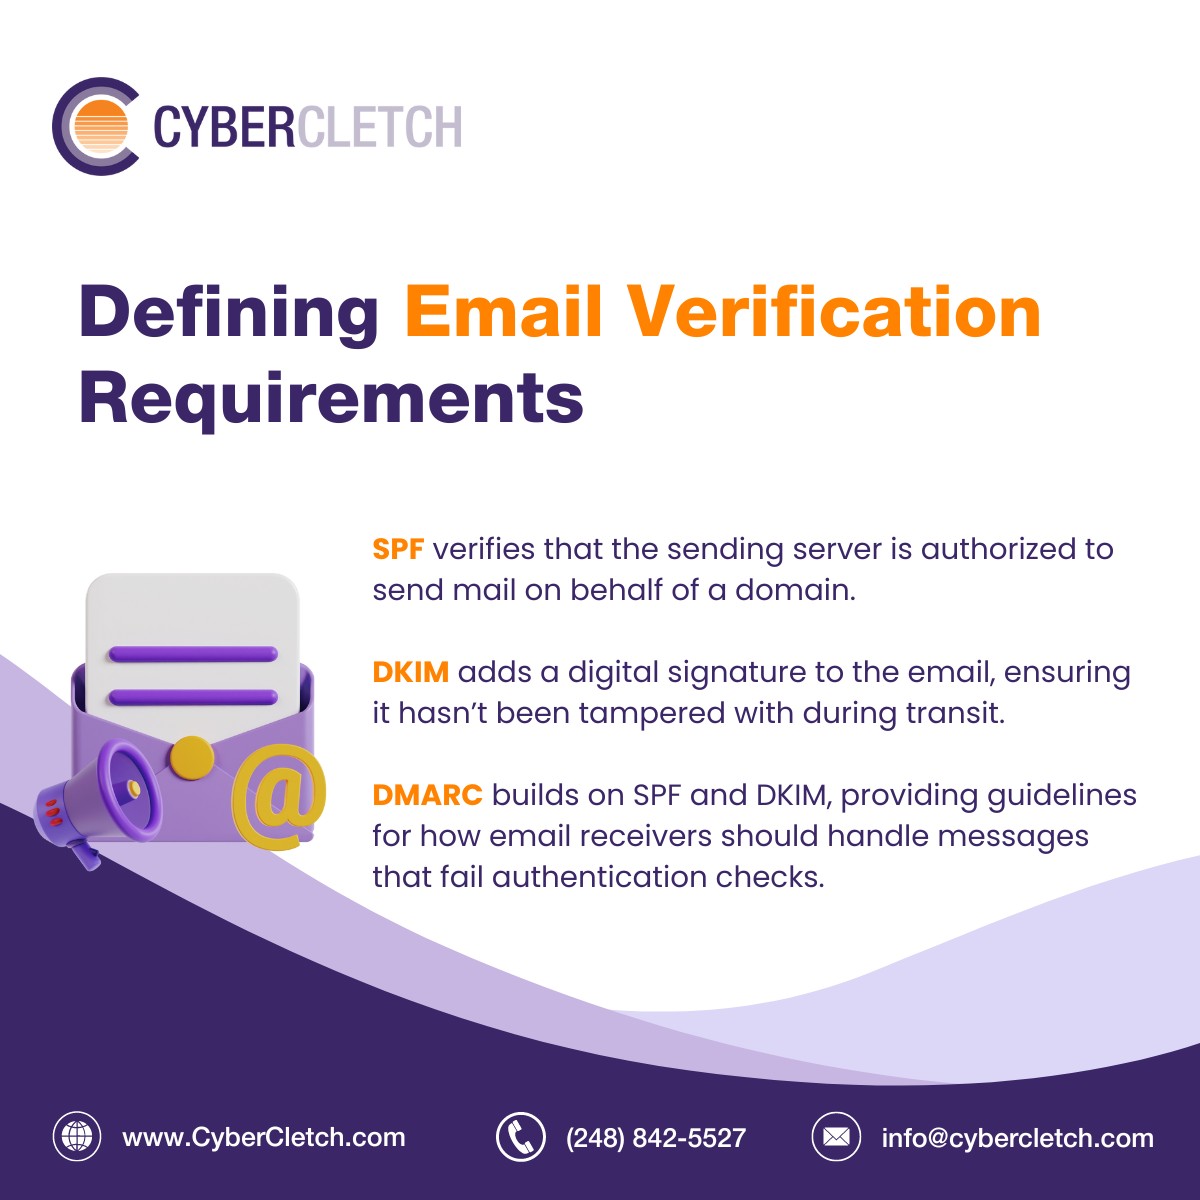 Email Verification Requirements Definitions for SPF, DKIM, DMARC